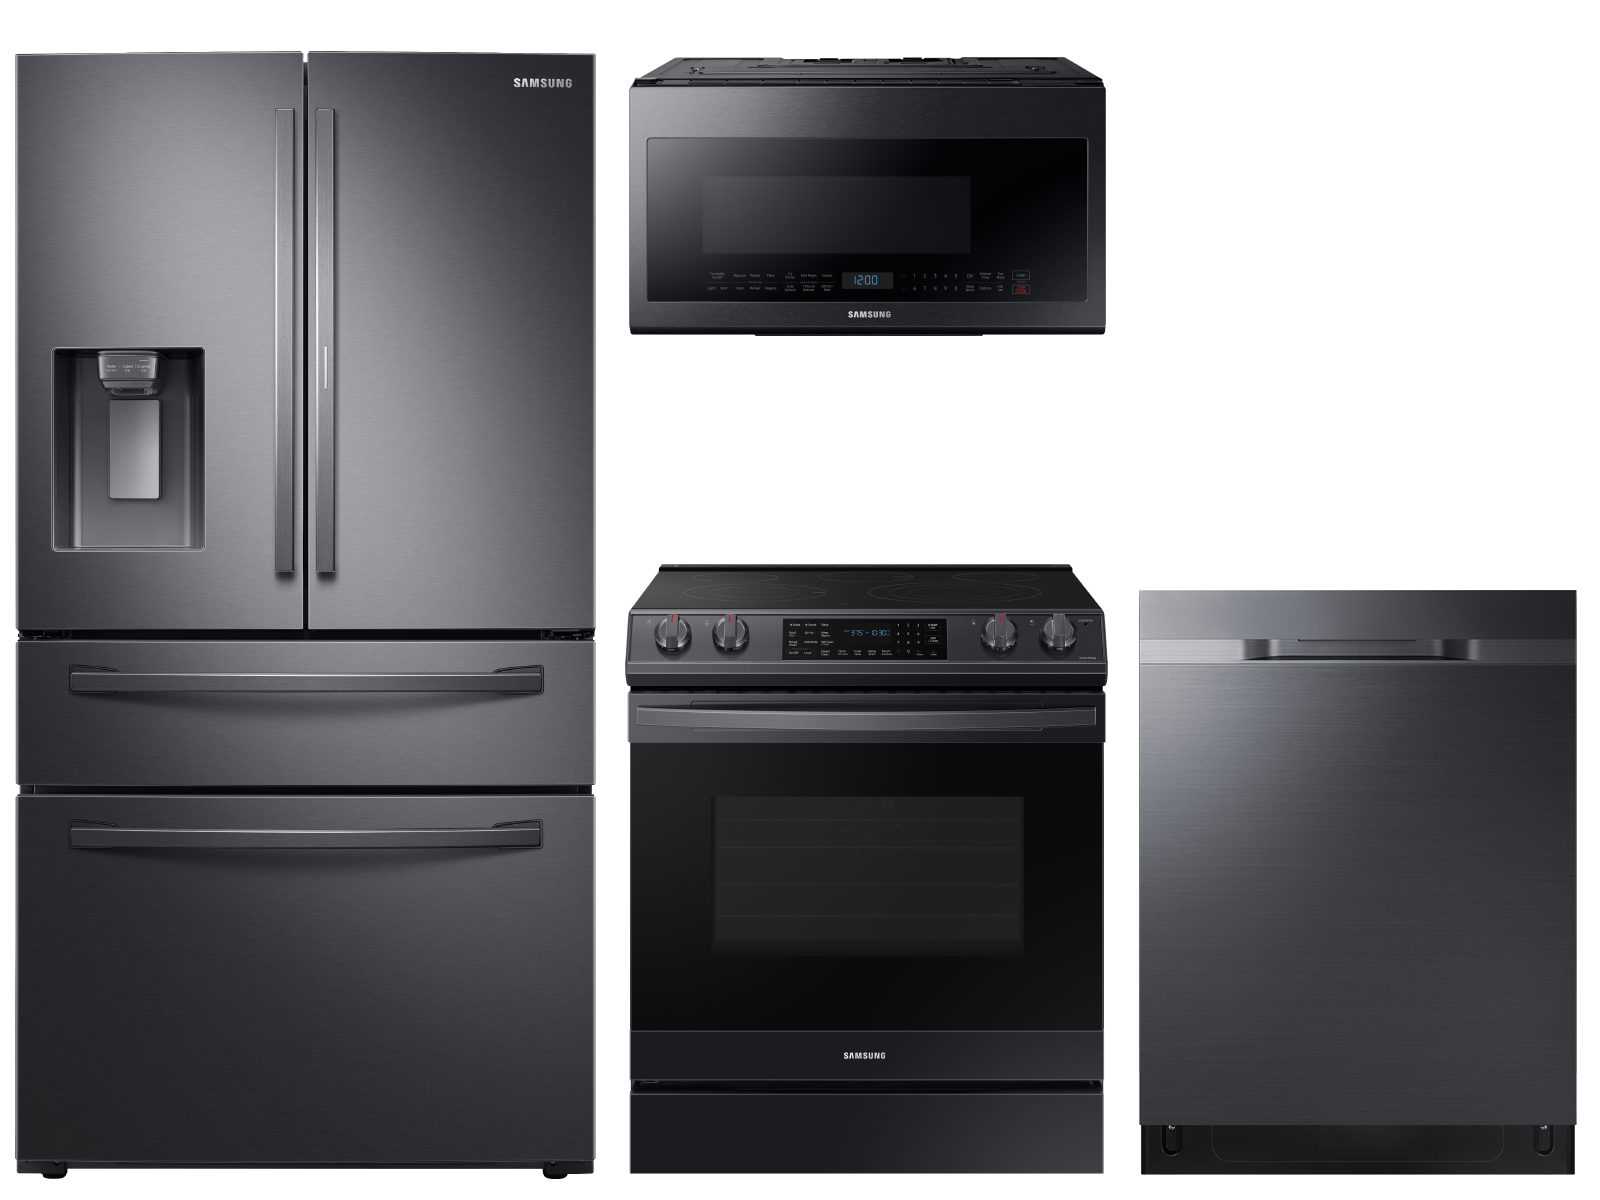 Samsung Food Showcase 4-Door Refrigerator + Slide-in Electric Range with Air Fry + StormWash™ Dishwasher + Microwave in Black Stainless